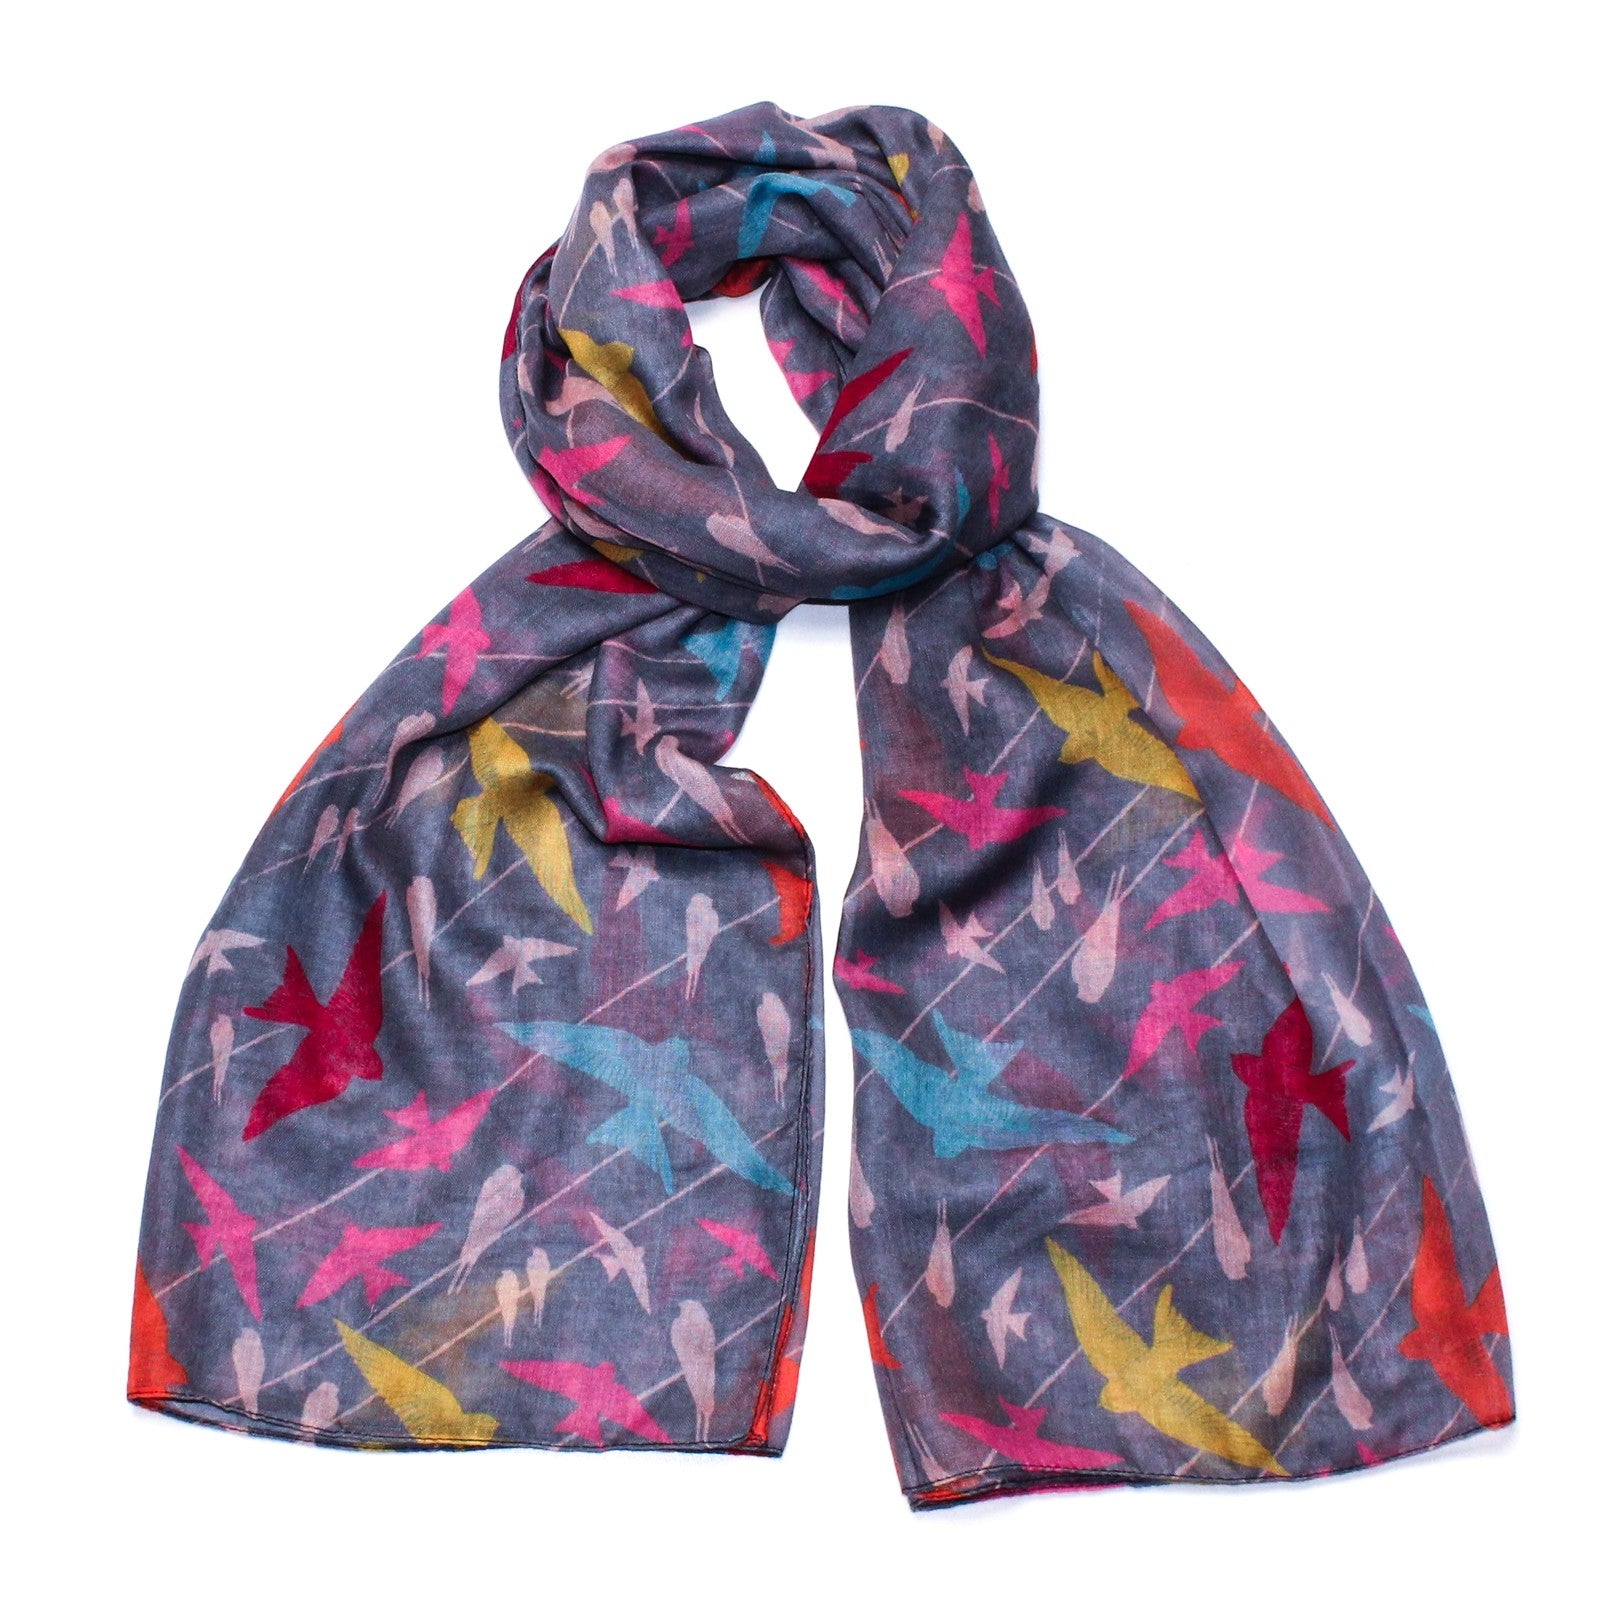 Gorgeous grey scarf covered in multi-colour birds in flight